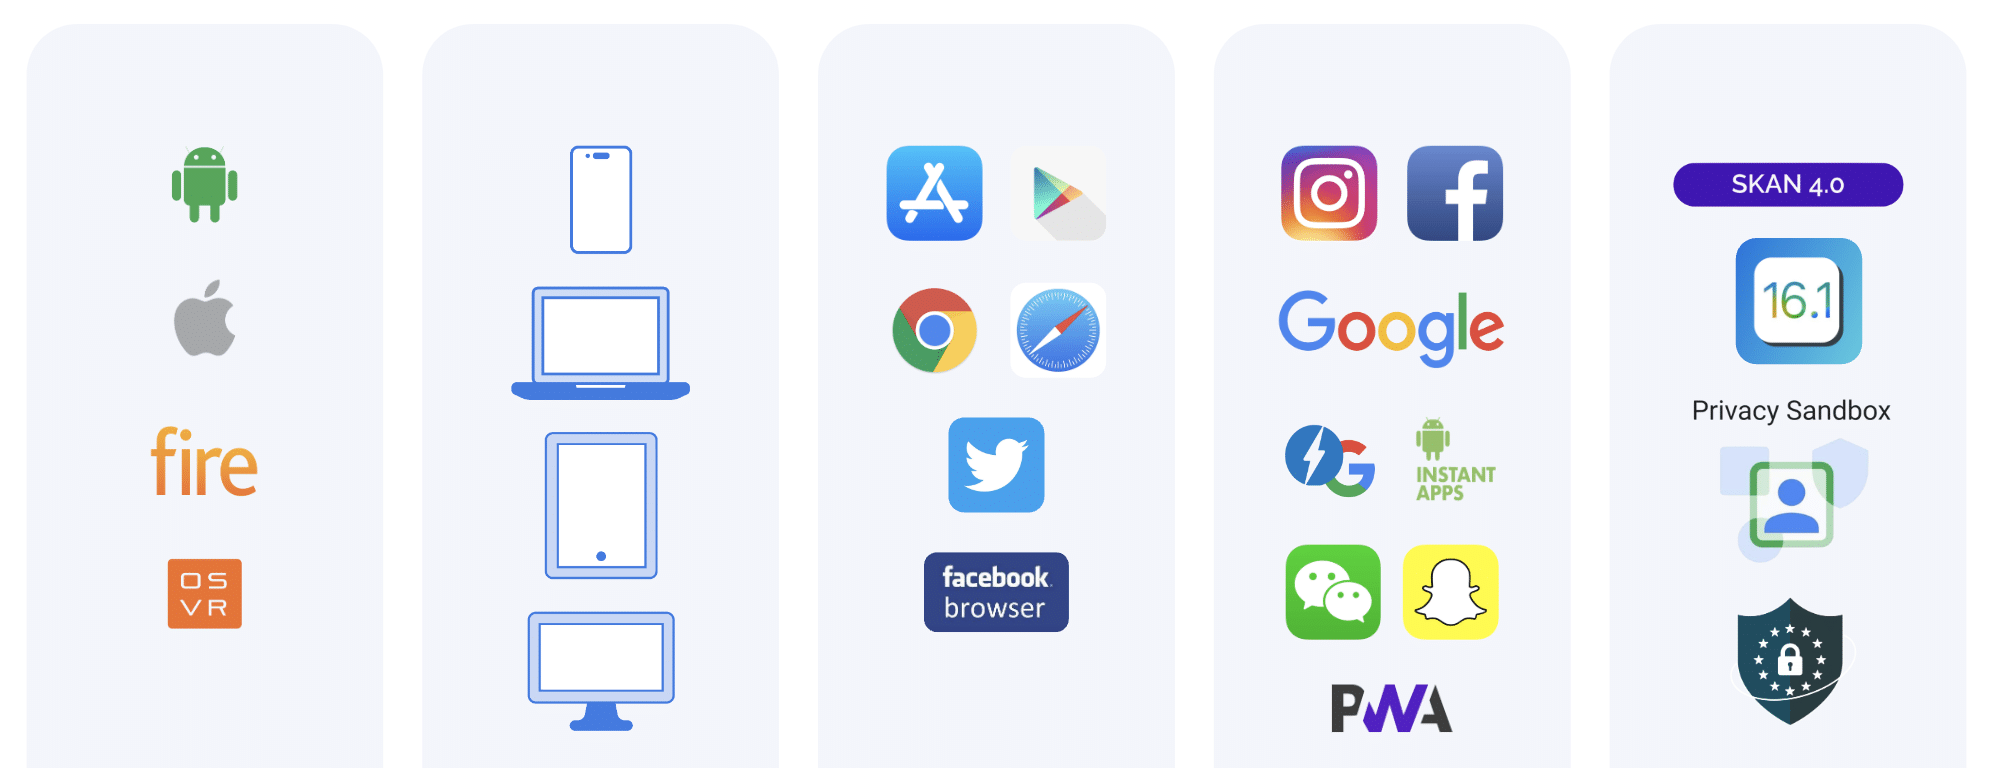 Illustrative graphic showing the various channels, devices, and platforms that users operate on (like iOS, Android, Facebook, Instagram, Snap, etc.) and the privacy regulations impacting brands, including SKAN and Privacy Sandbox. 